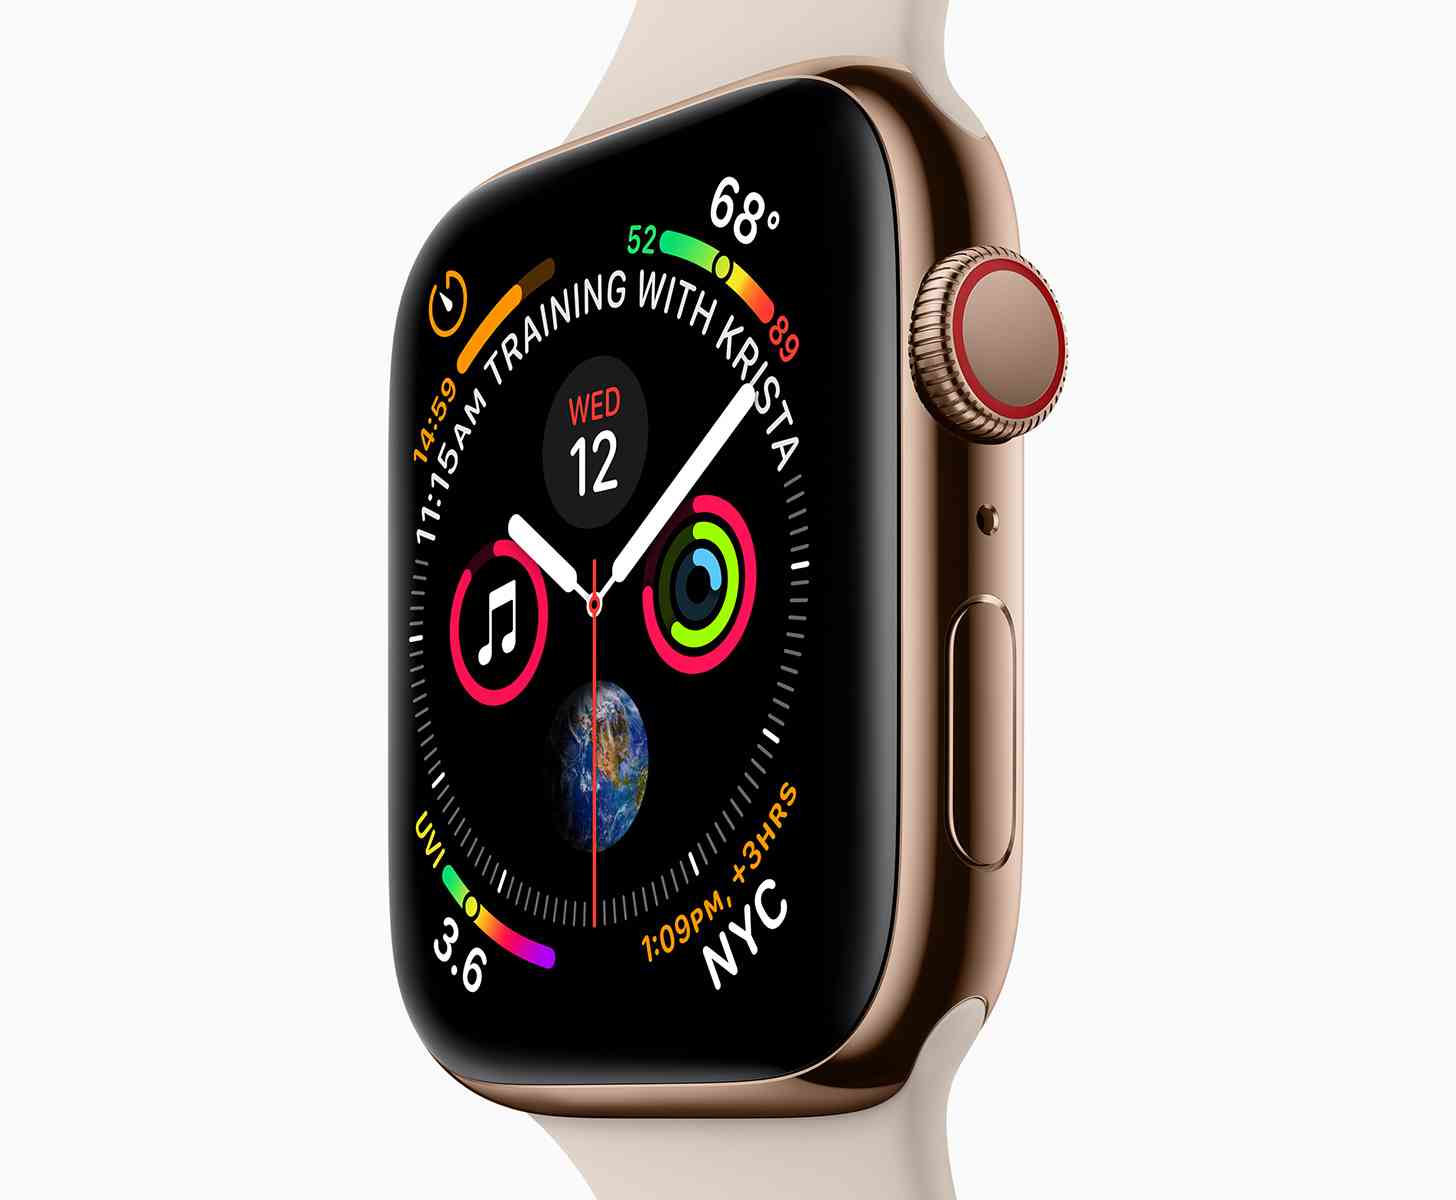 Apple Watch Series 4 official